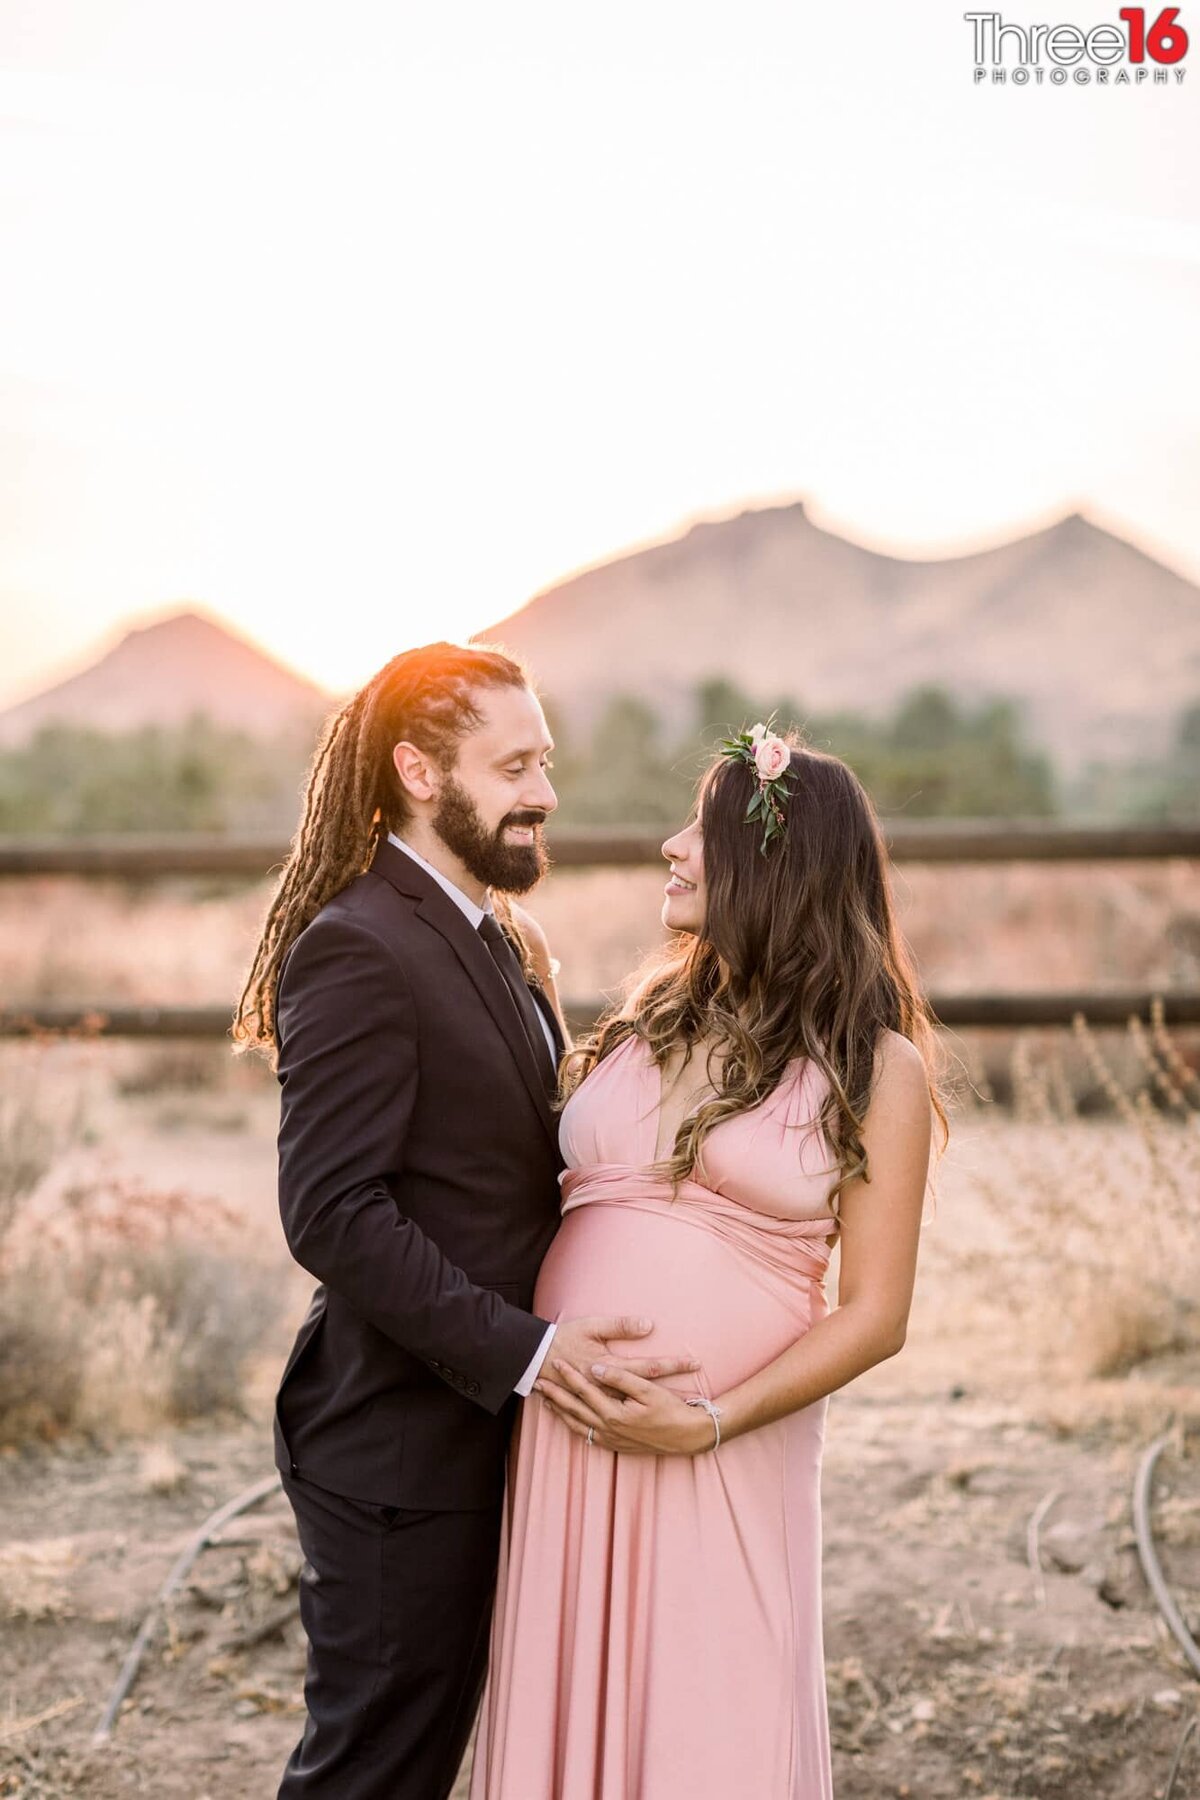 Dad to be places his hand on his Wife's stomach during maternity photo shoot